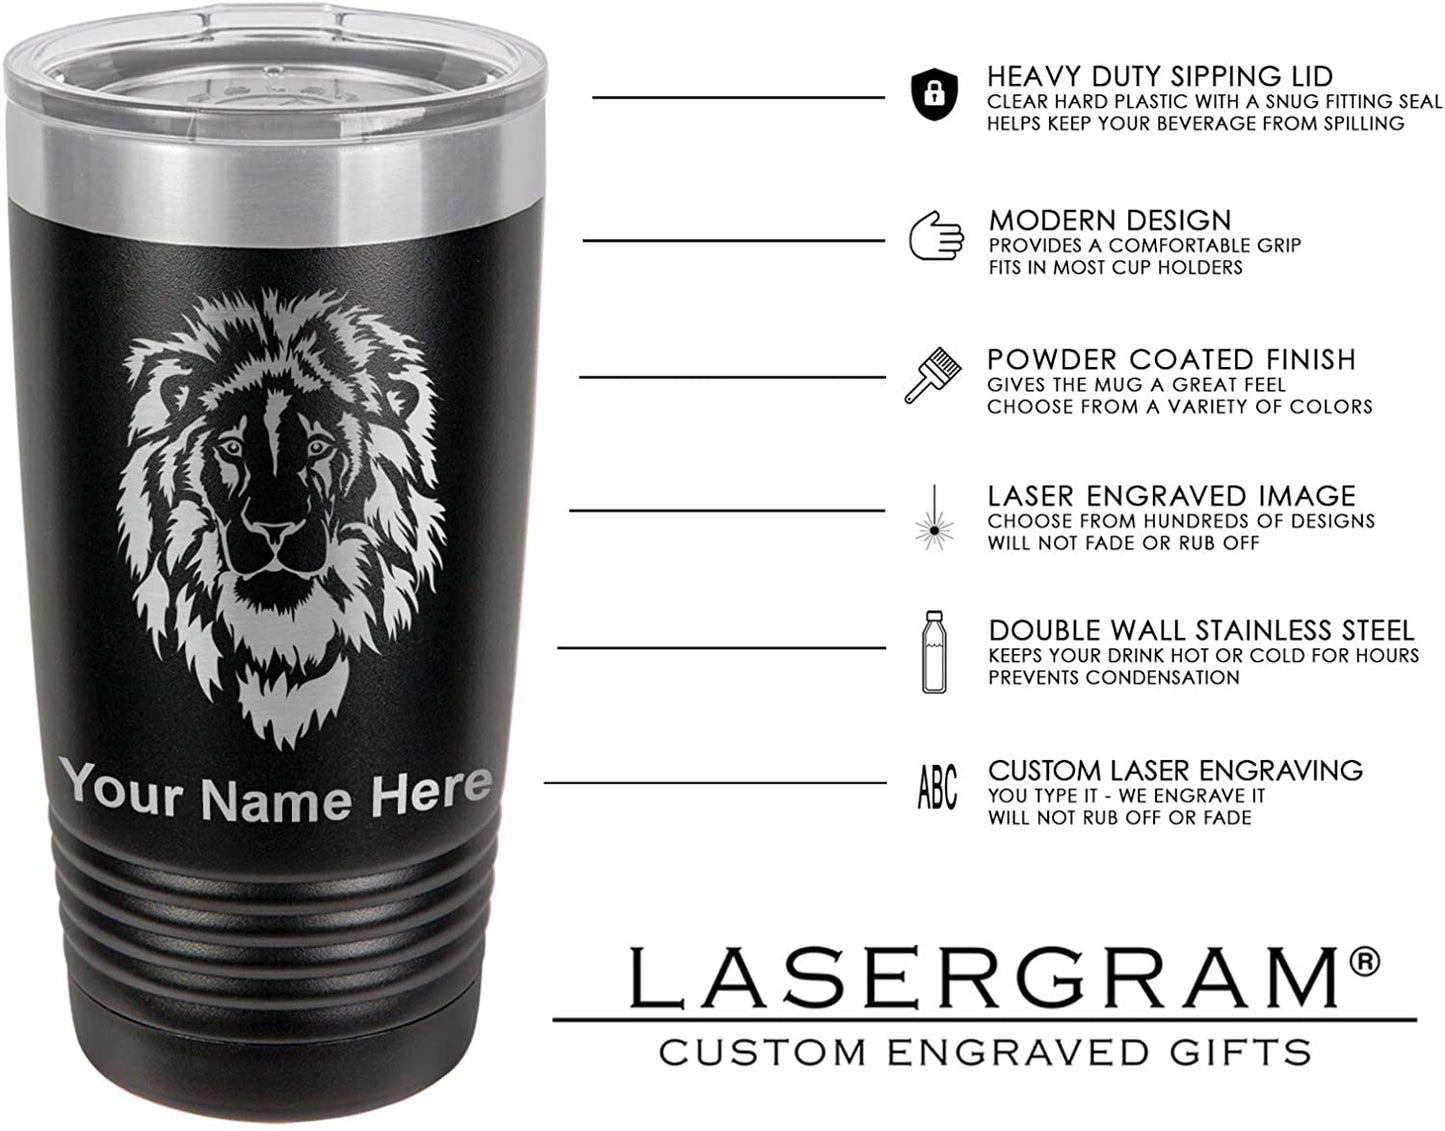 20oz Vacuum Insulated Tumbler Mug, Squirrel, Personalized Engraving Included